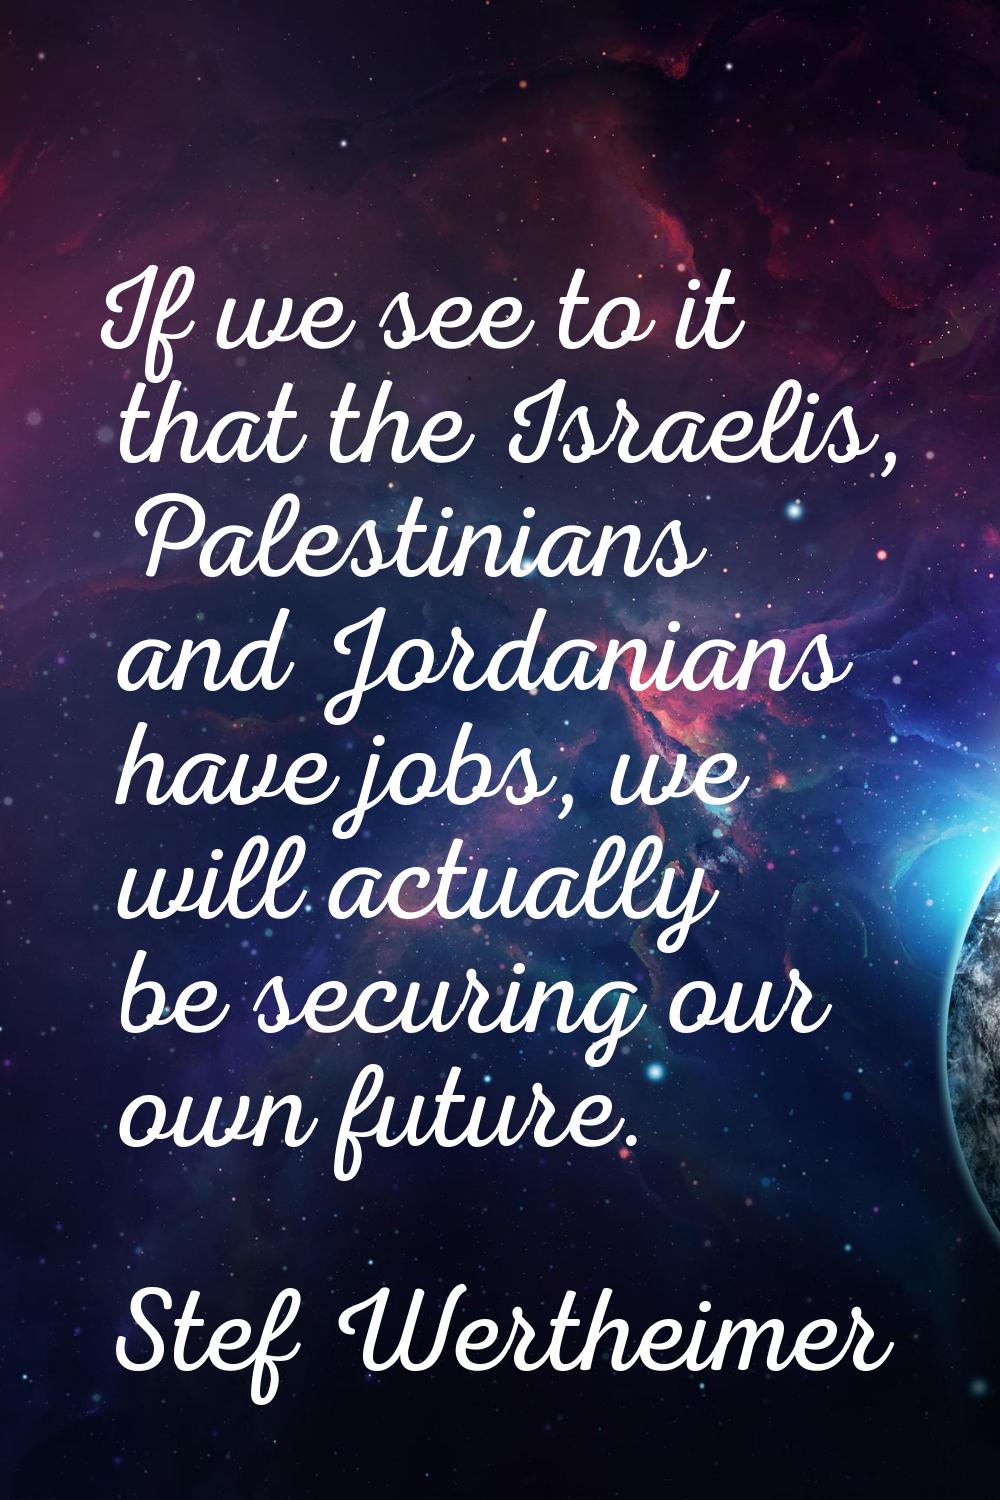 If we see to it that the Israelis, Palestinians and Jordanians have jobs, we will actually be secur